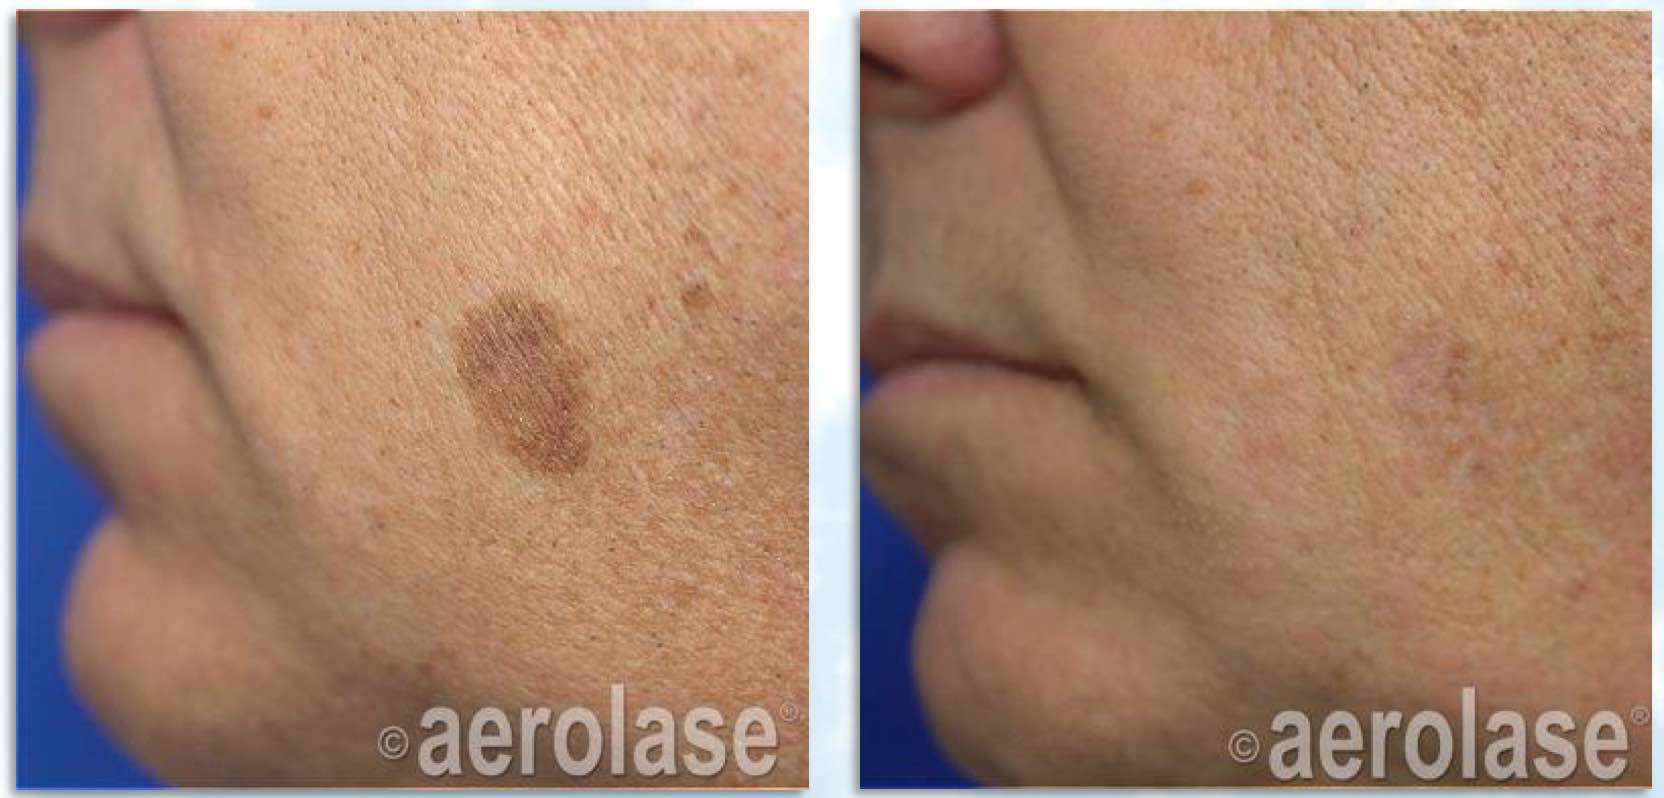 Treatment of facial pigment spot with the Aerolase Neo laser Dr BCK Patel MD, FRCS Plastic Surgeon Salt Lake City and St George UtahPicturePicture